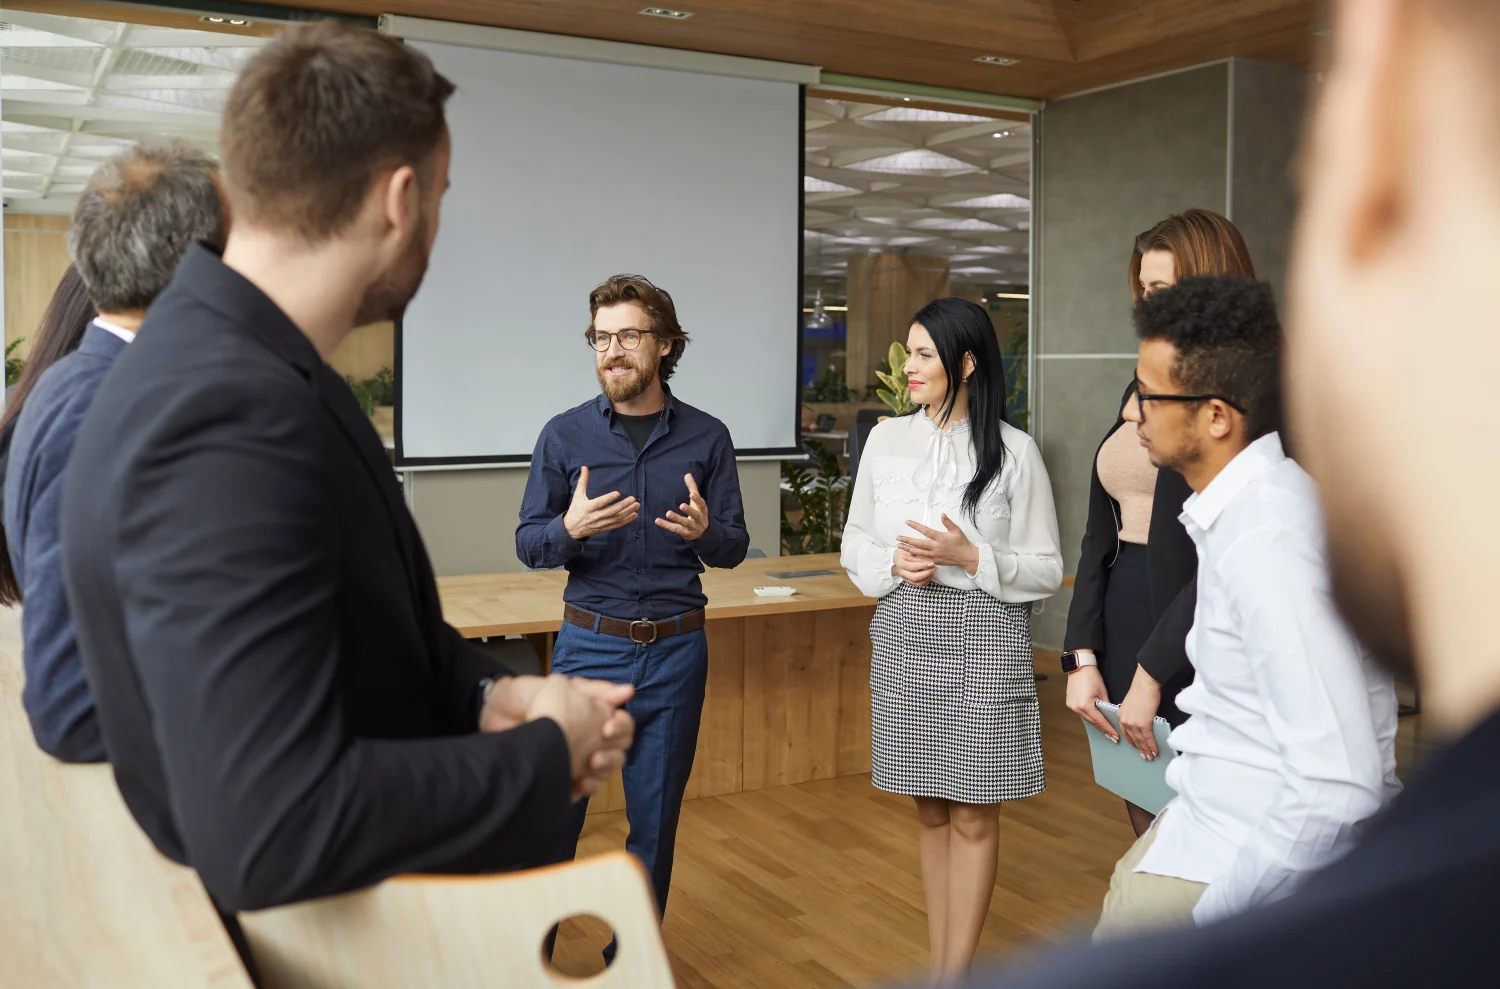 Business coach talking to group of people standing in office around him